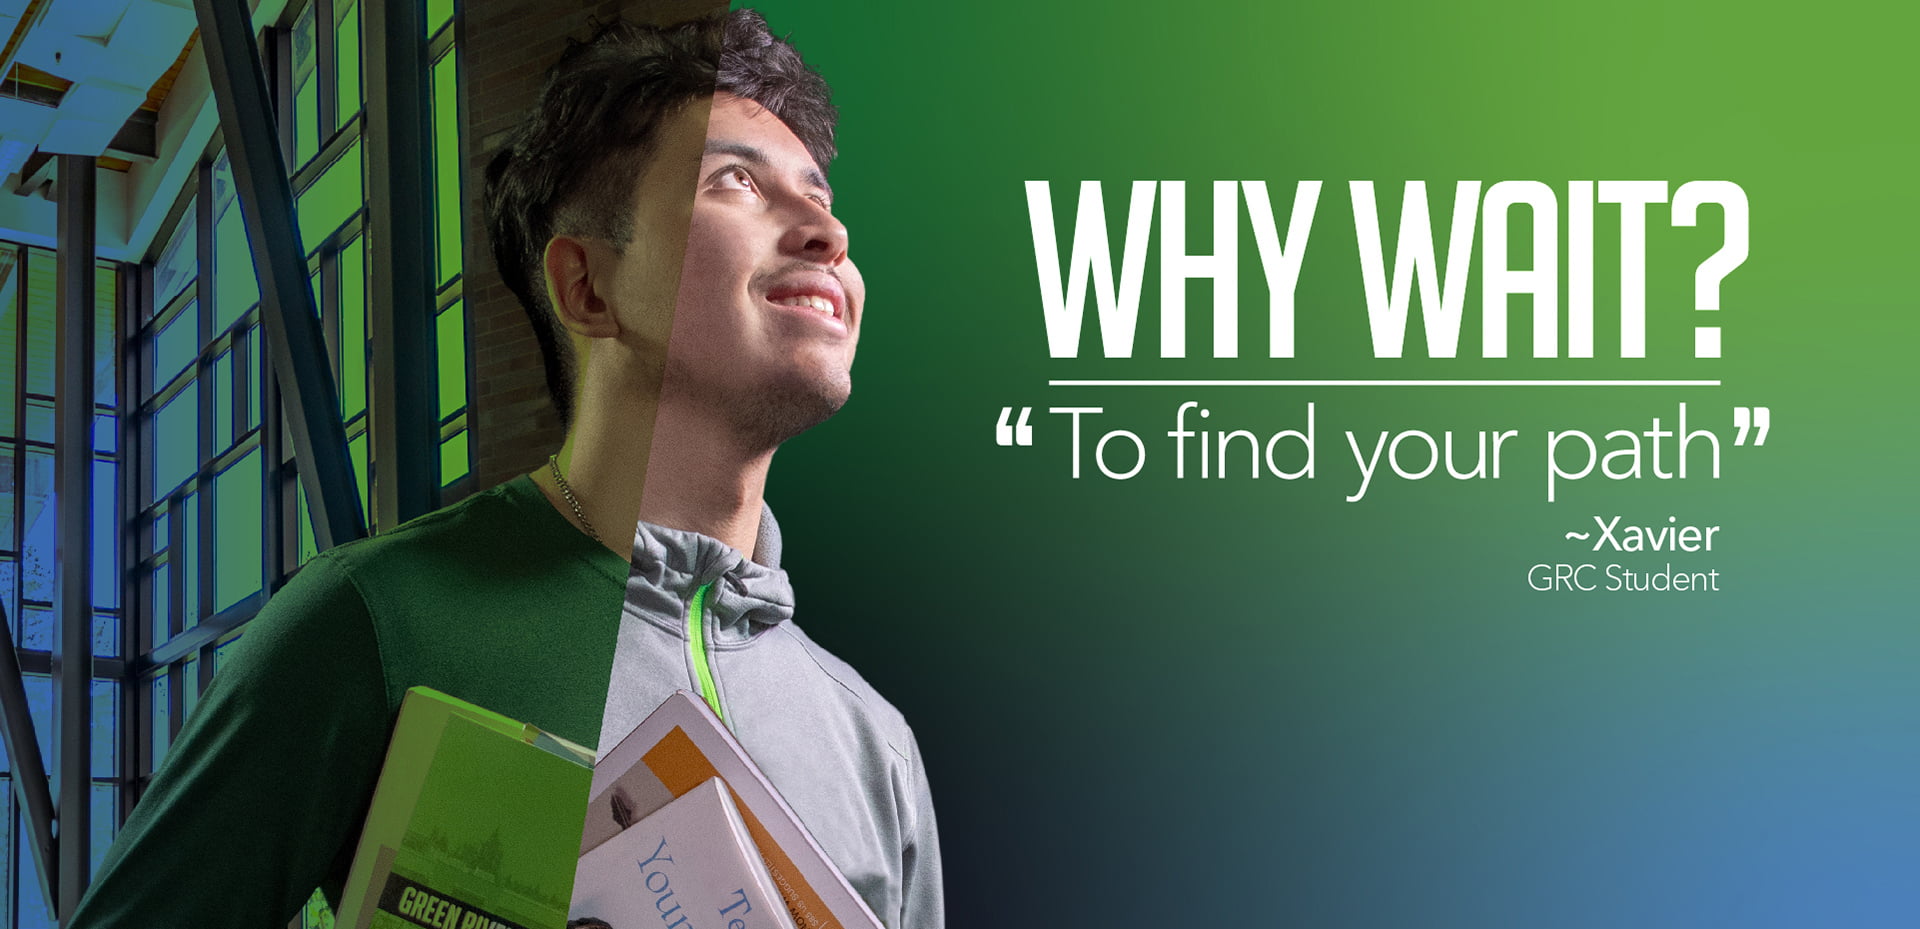 Green River College student Xavier whose image is split into two with one side showing him as a student, and the other as an educator with the words "Why Wait? To find your path".